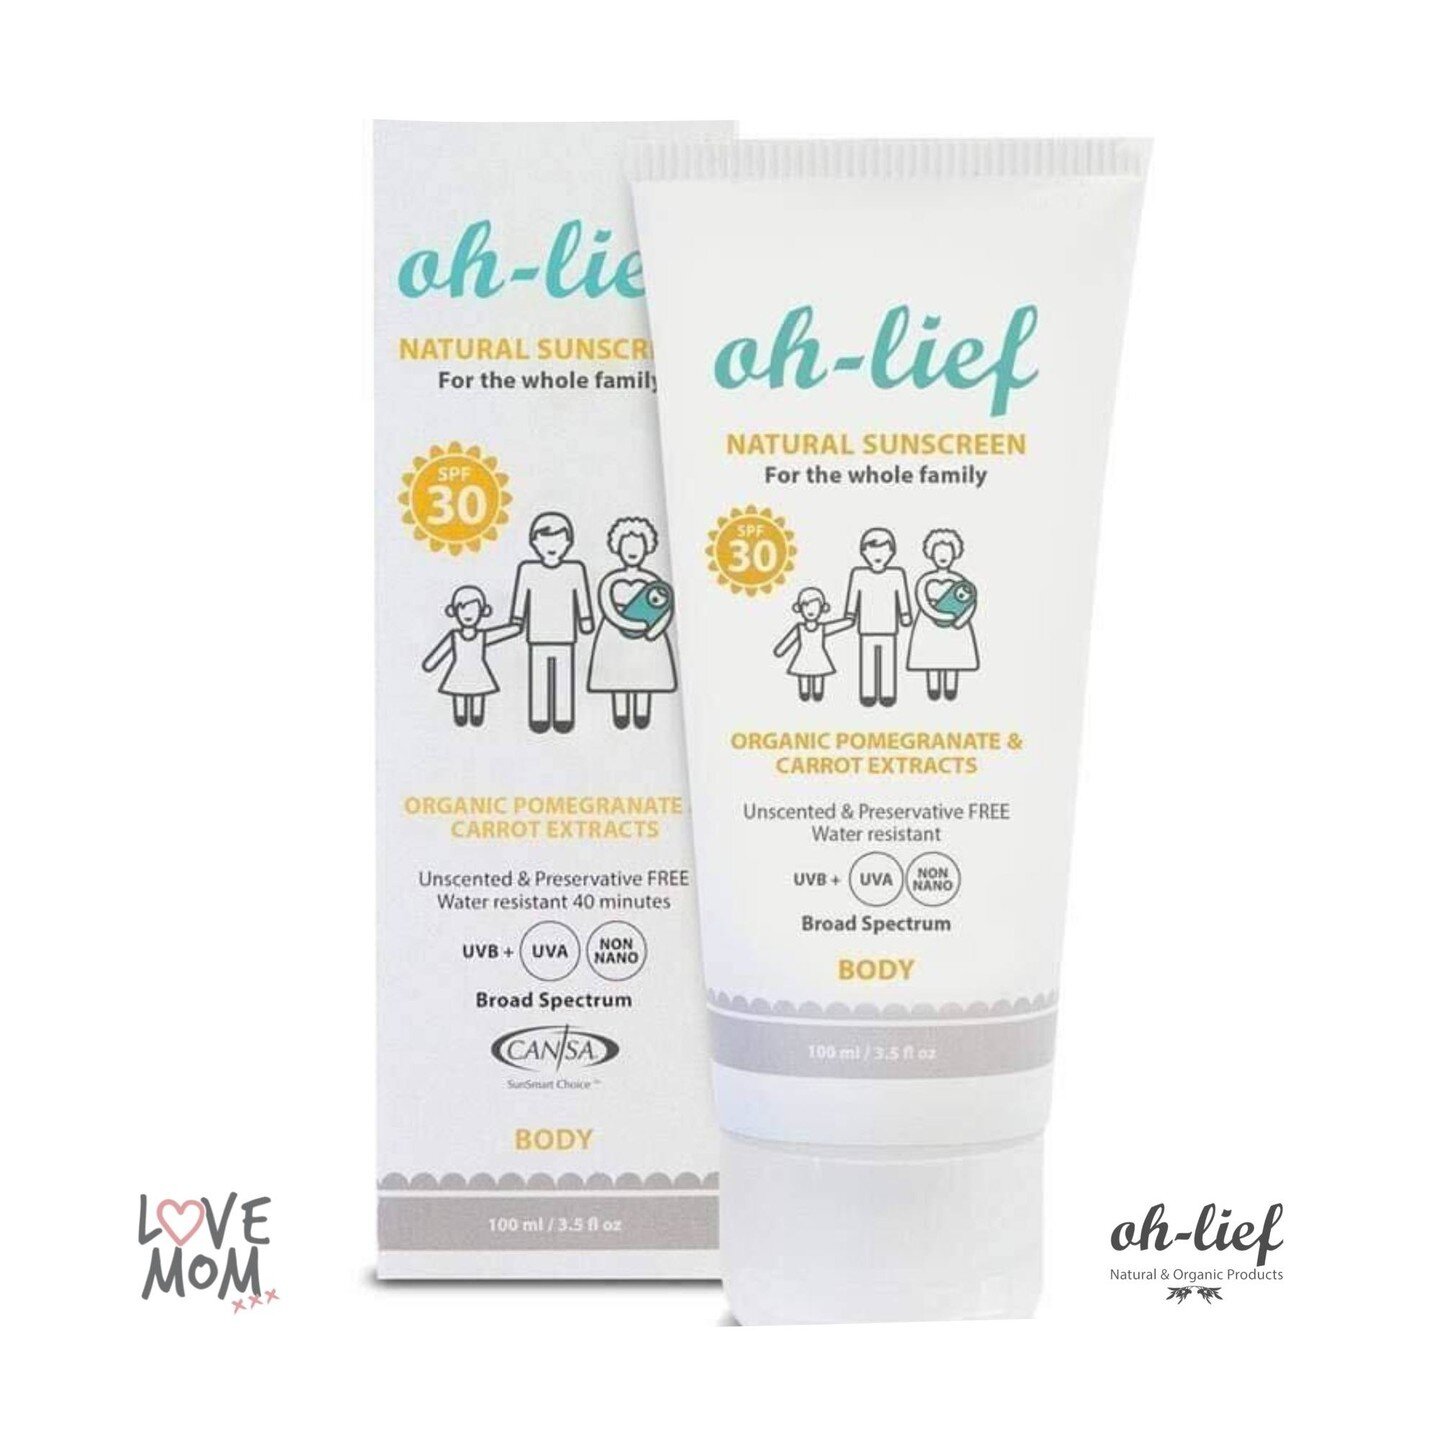 🌞OH-LIEF NATURAL BODY SUNSCREEN🌞⁠
⁠
This broad-spectrum certified natural &amp; organic sunblock is made using non-nano zinc oxide, a natural soft mineral that sits on the skin without sinking in. That means the Oh-Lief sunscreen creates a physical